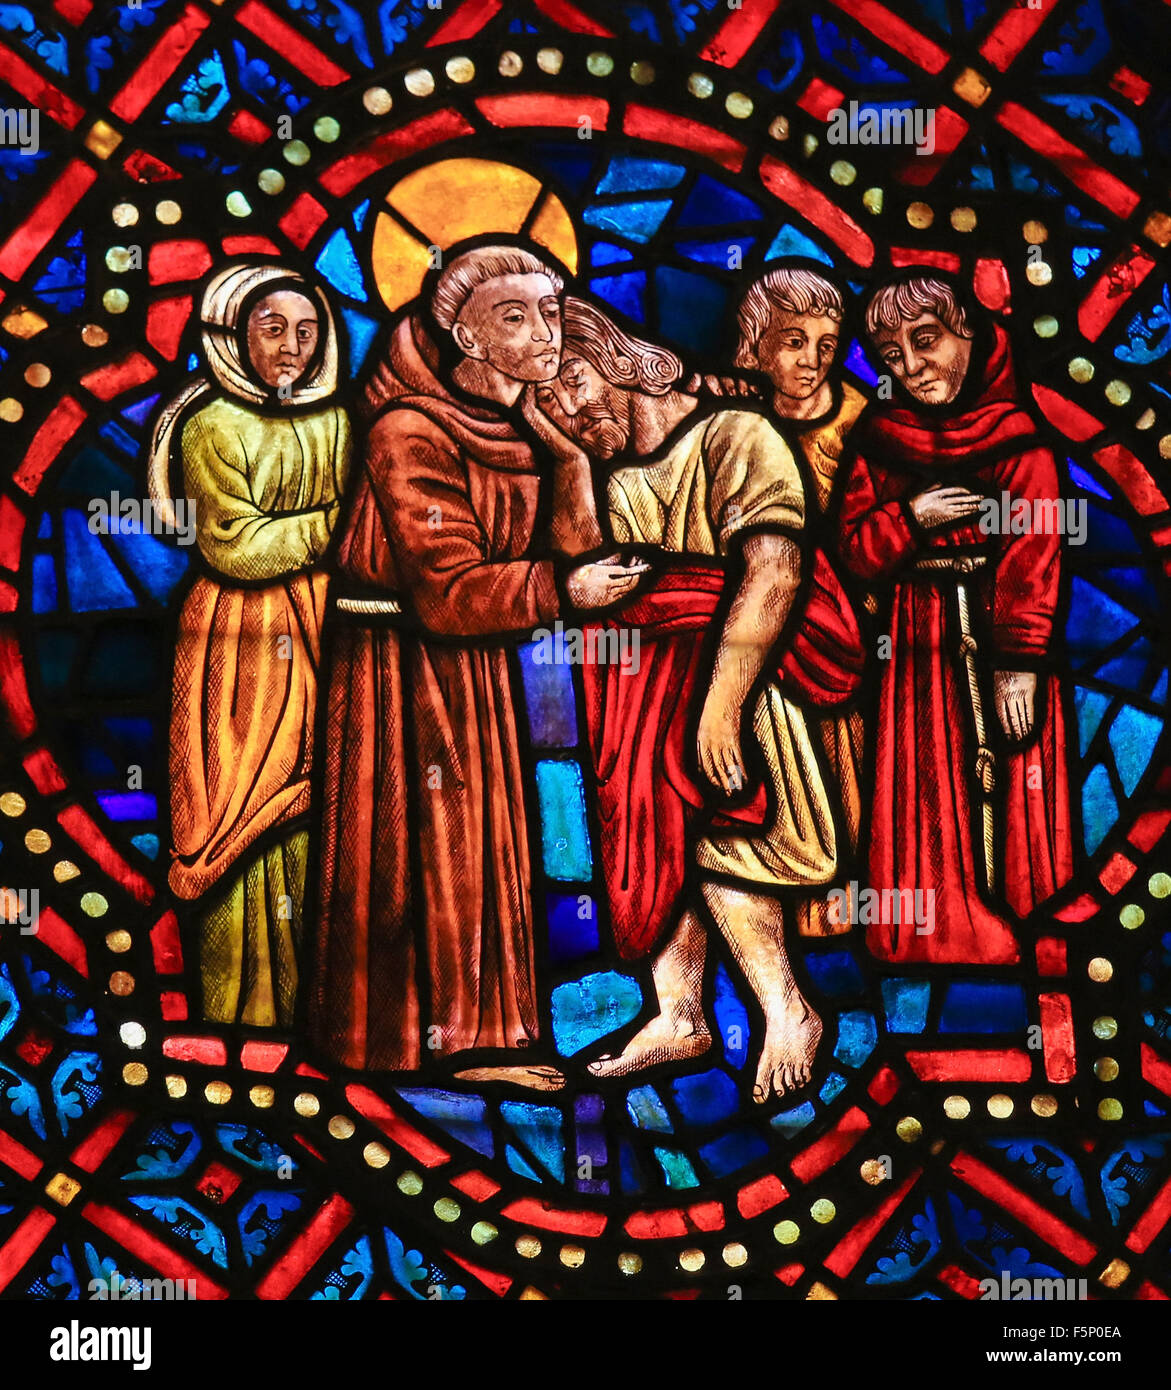 LEON, SPAIN - AUGUST 12, 2014: Stained Glass window depicting a Christian Saint hugging Christ in the Cathedral of Leon Stock Photo